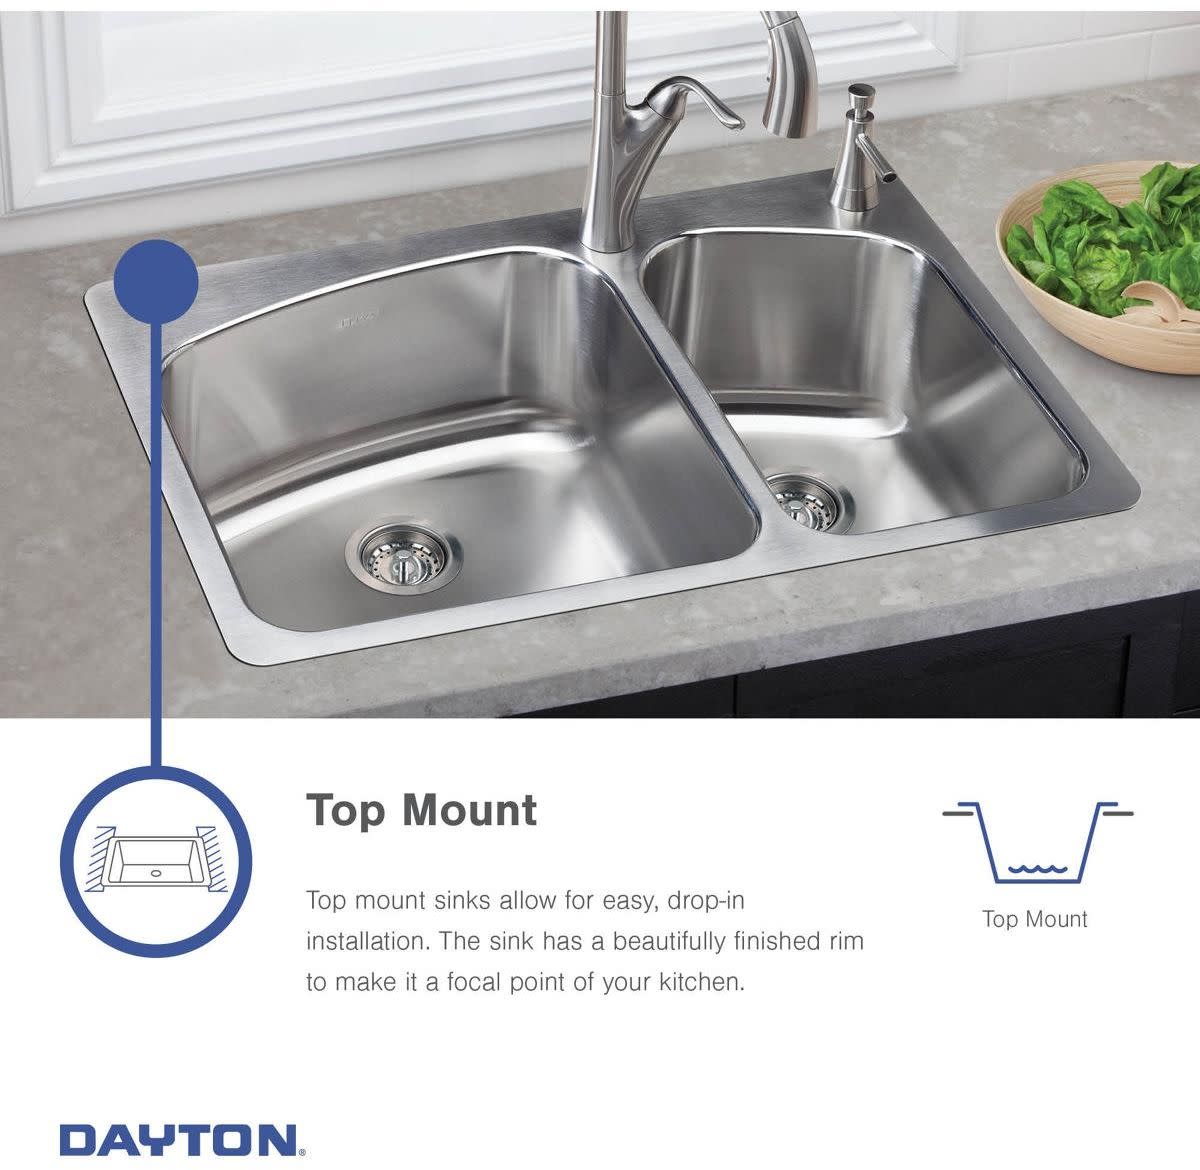 Elkay D233212 Dayton 33 x 21-1/4 x 6-9/16 Equal Double Bowl Drop-in Kitchen Sink, 2 Holes, 22-Gauge Stainless - image 4 of 7